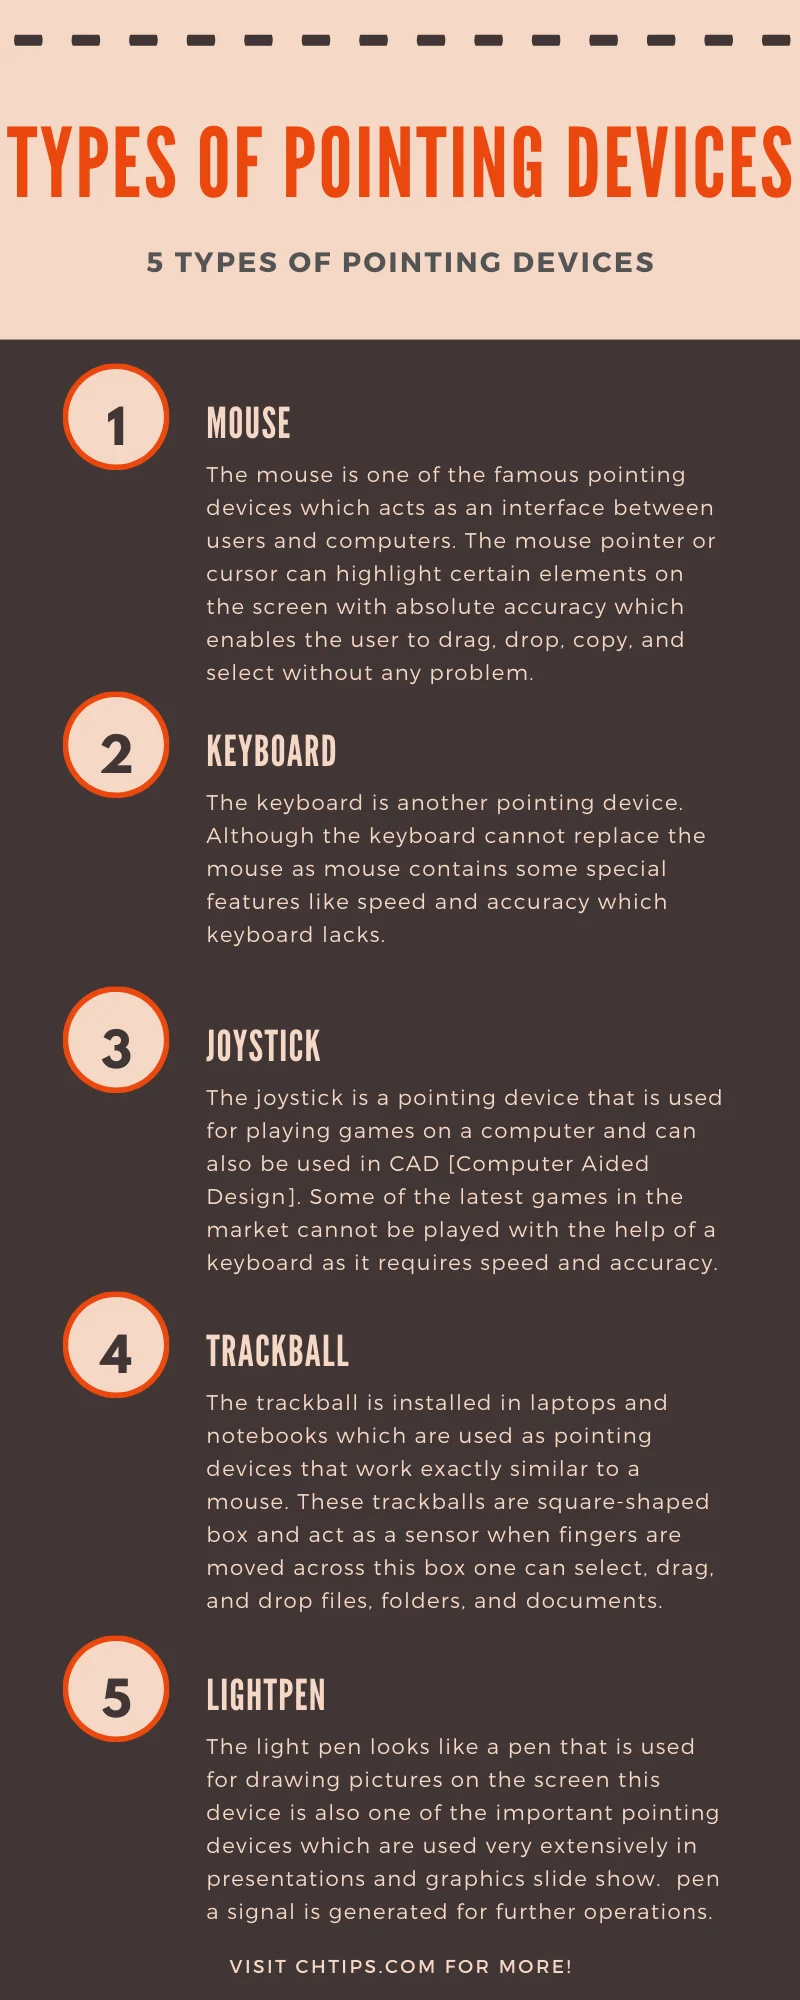 9 Types of Pointing Devices